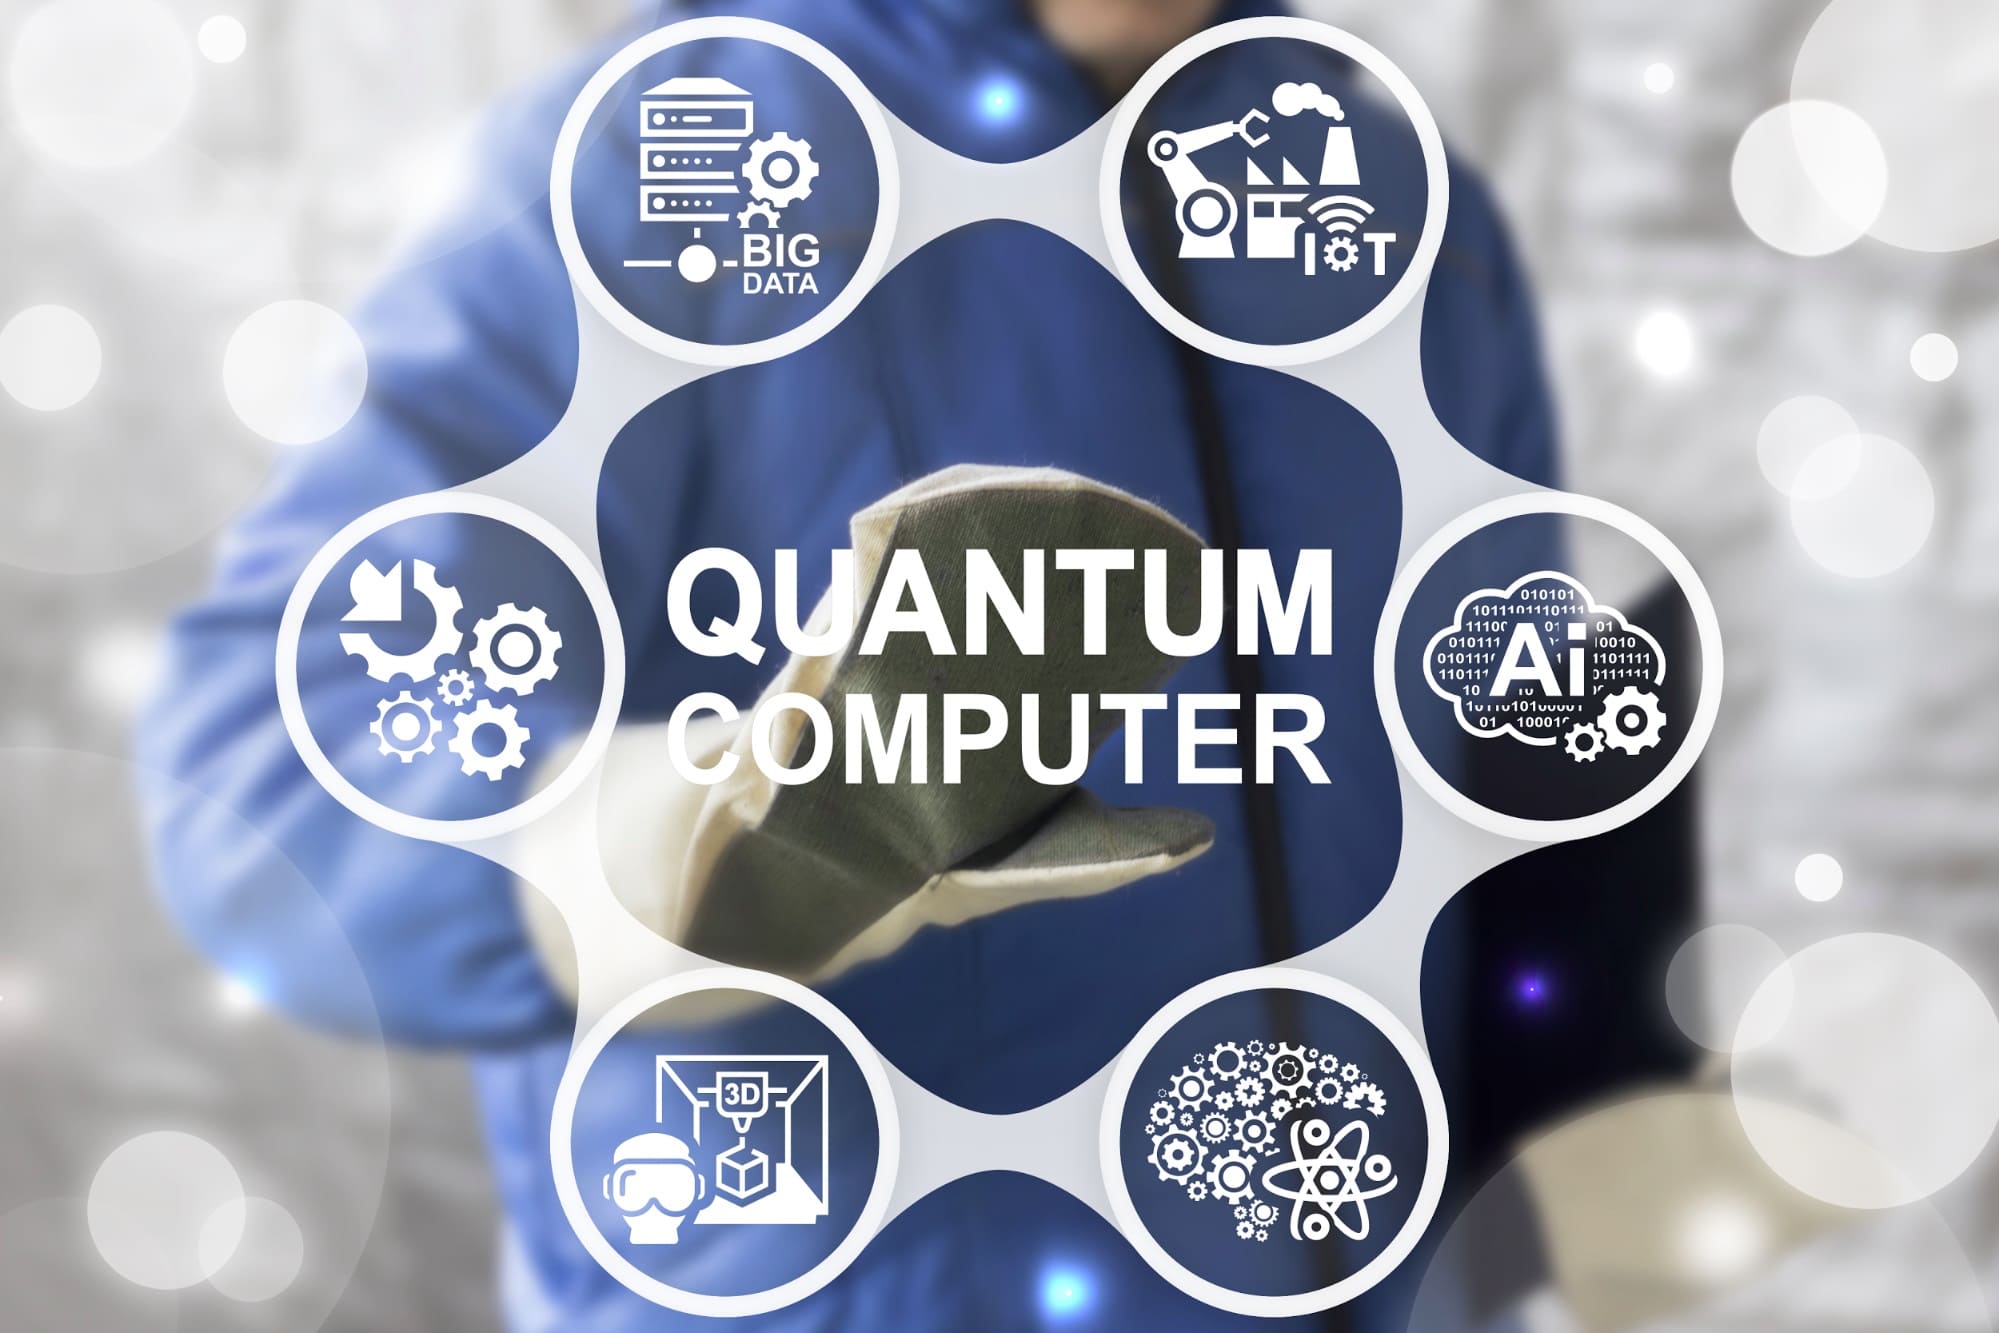 What Are Quantum Computers?